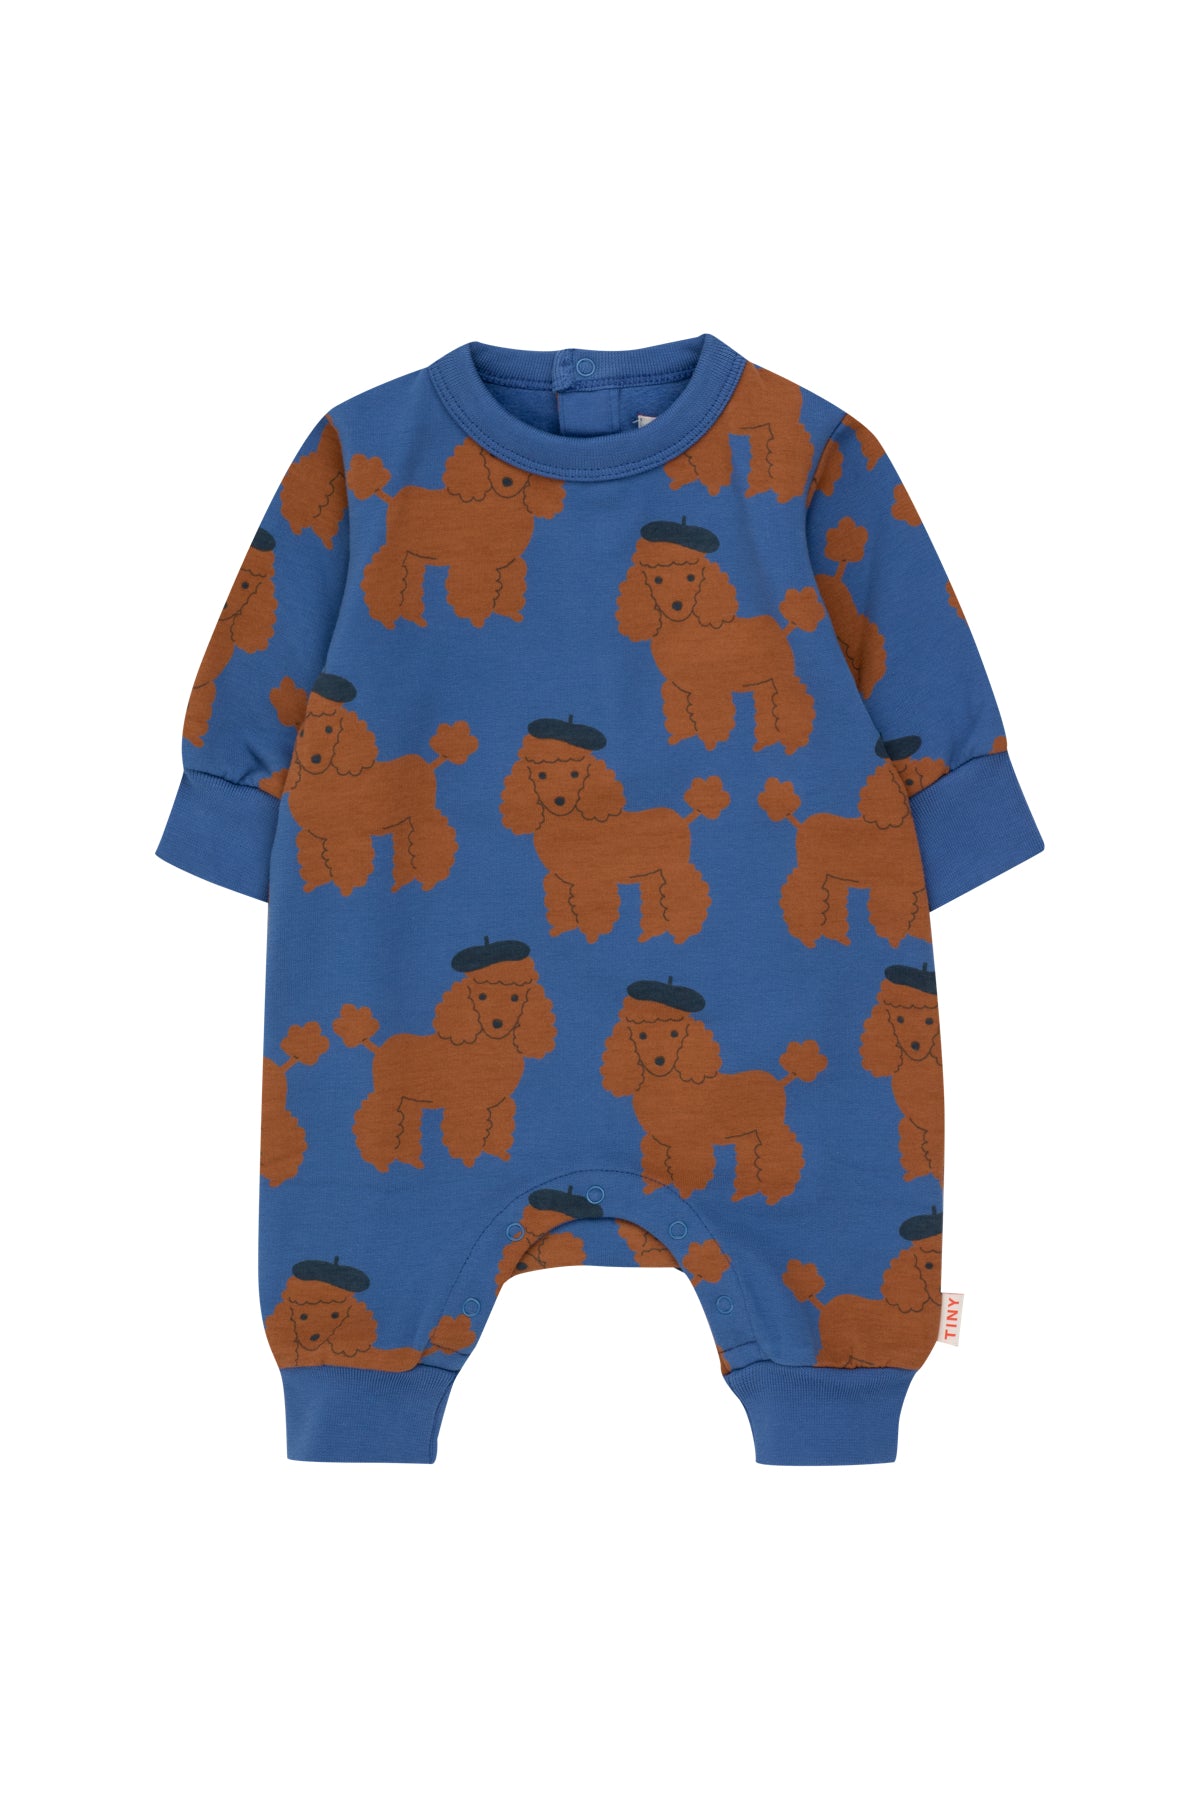 Tiny Cottons Tiny Poodle One Piece - Cobalt Blue – Dreams of Cuteness